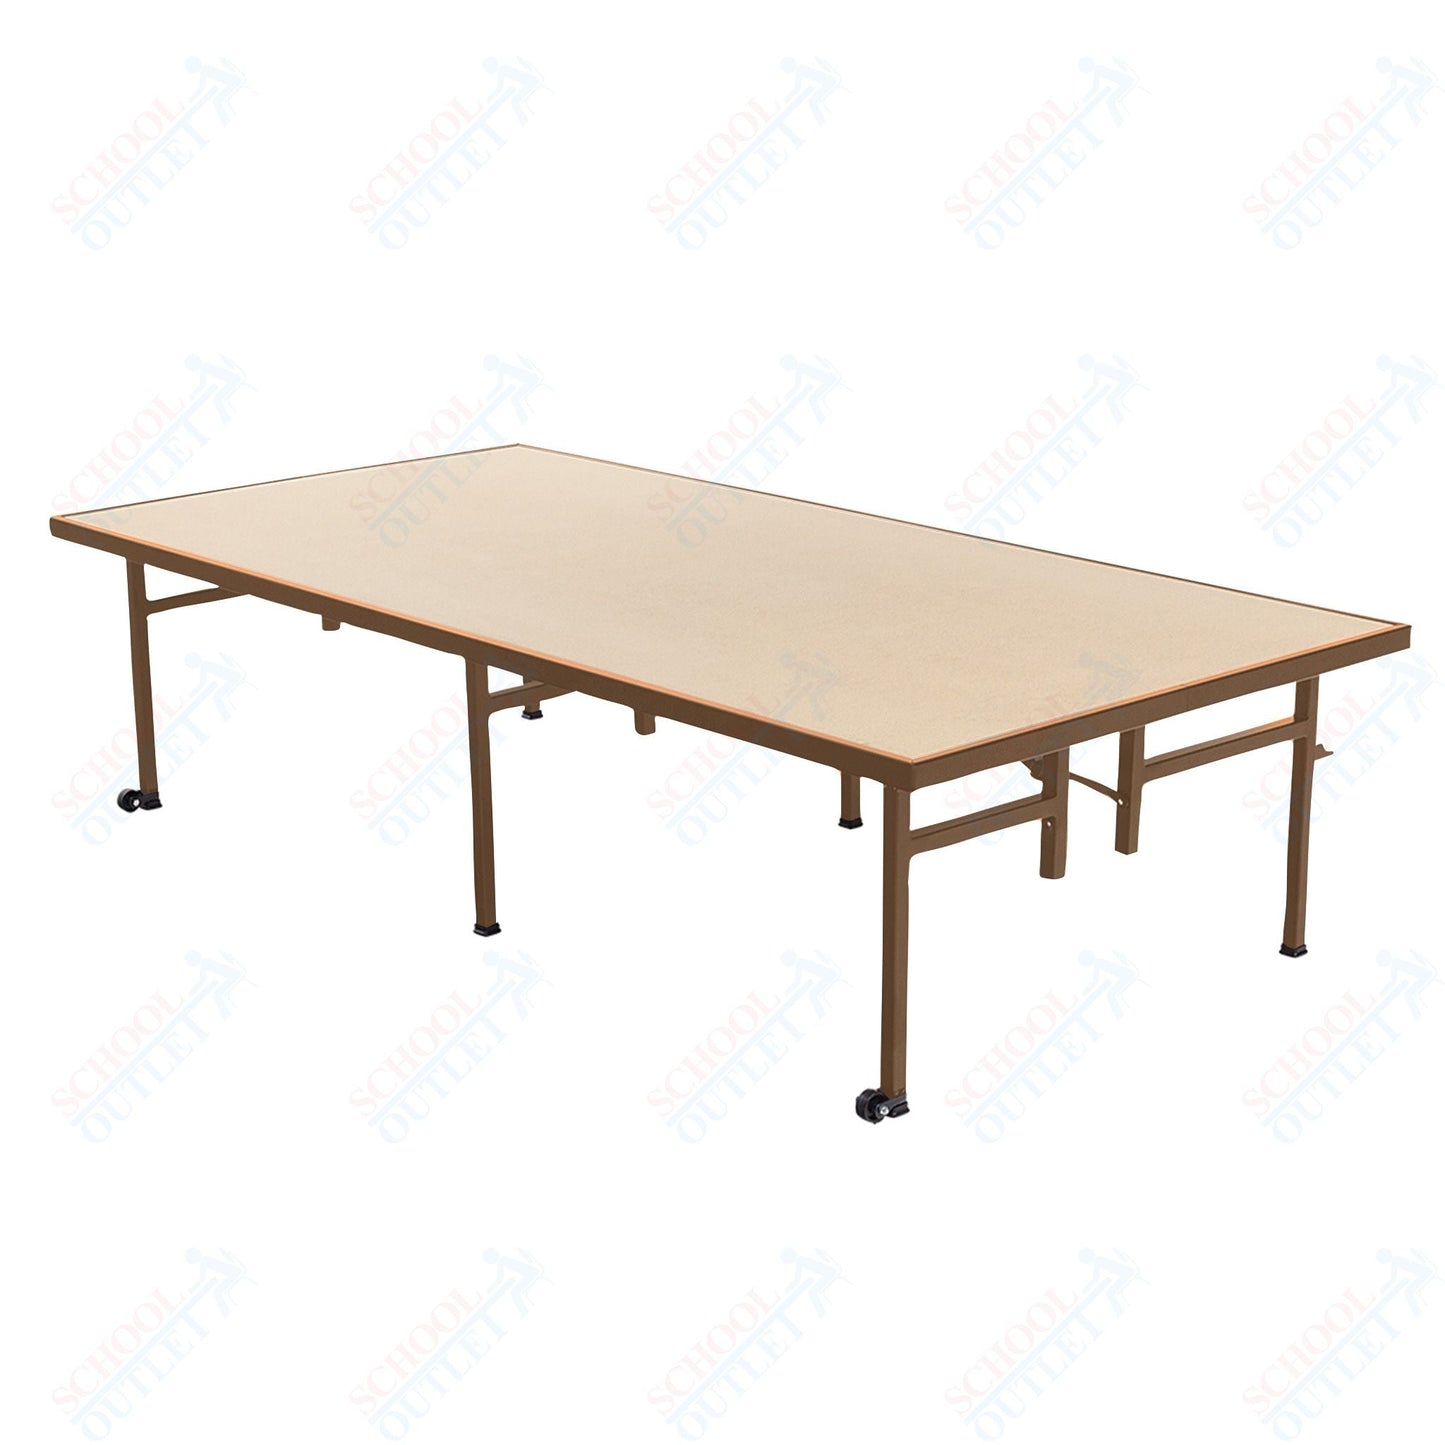 AmTab Fixed Height Stage - Hardboard Top - 36"W x 72"L x 8"H (AmTab AMT - ST3608H) - SchoolOutlet